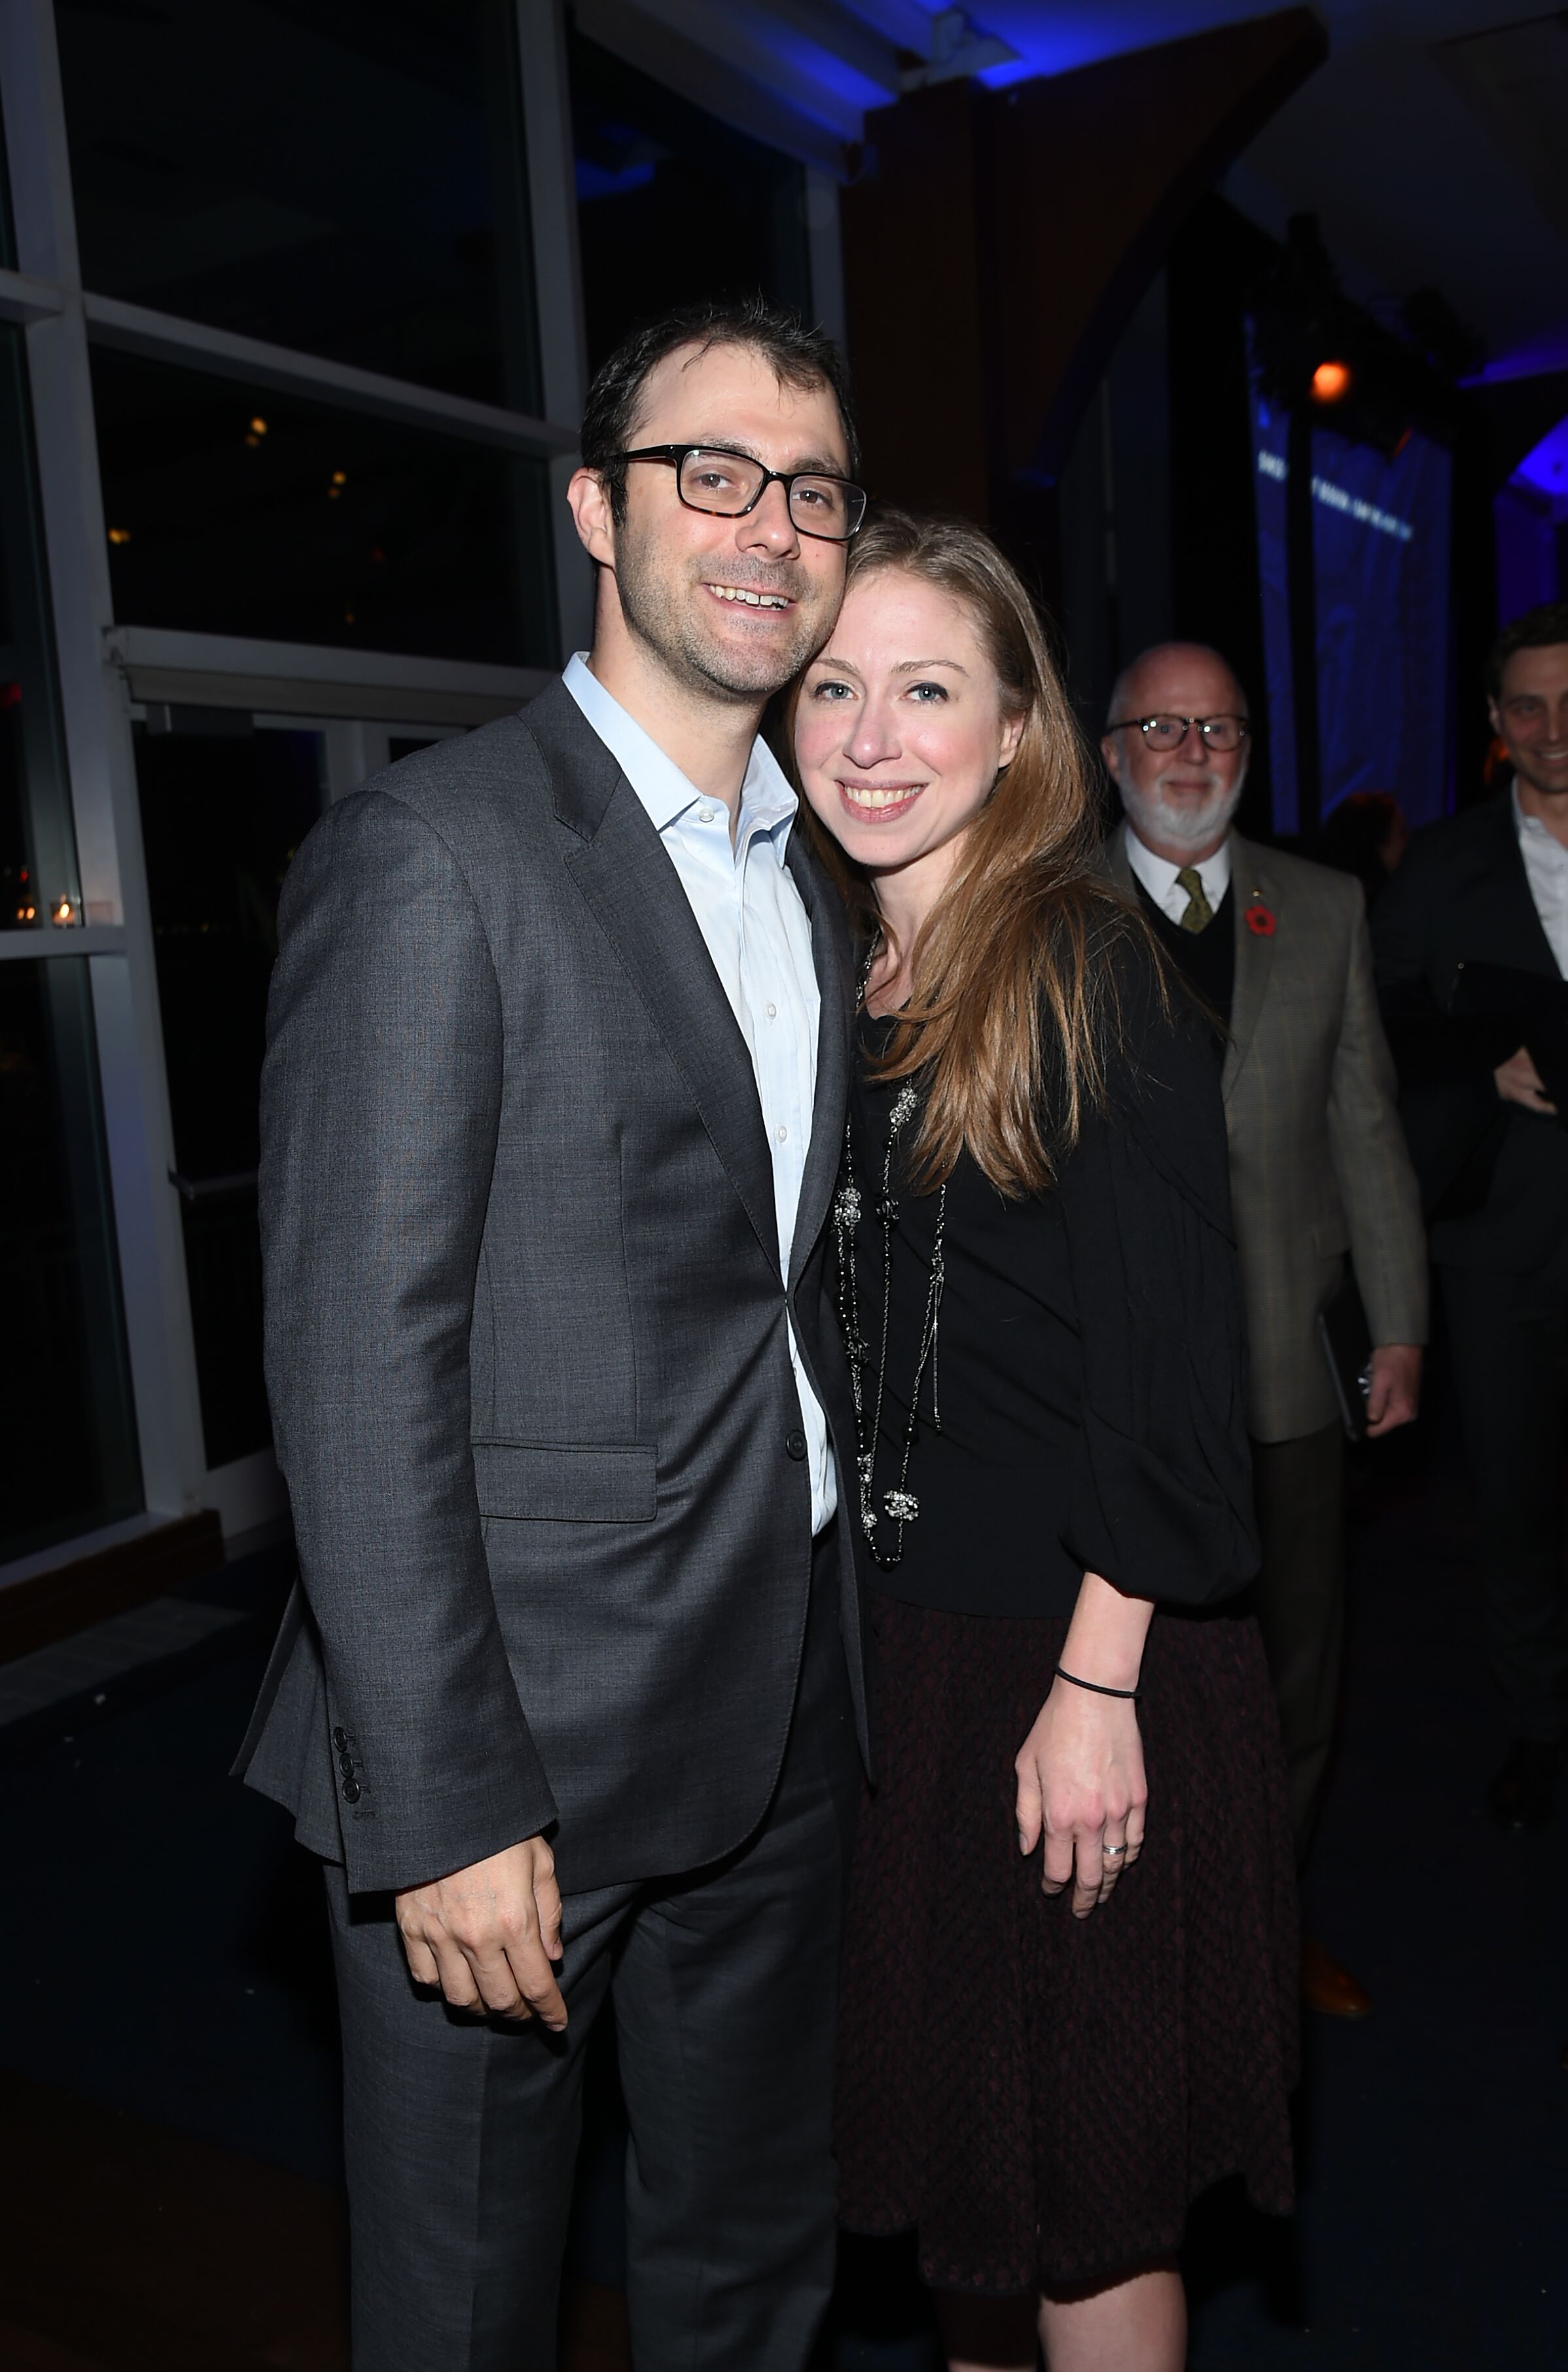 Chelsea Clinton and Marc Mezvinsky attend the Headstrong Gala 2017. | Photo: Getty Images